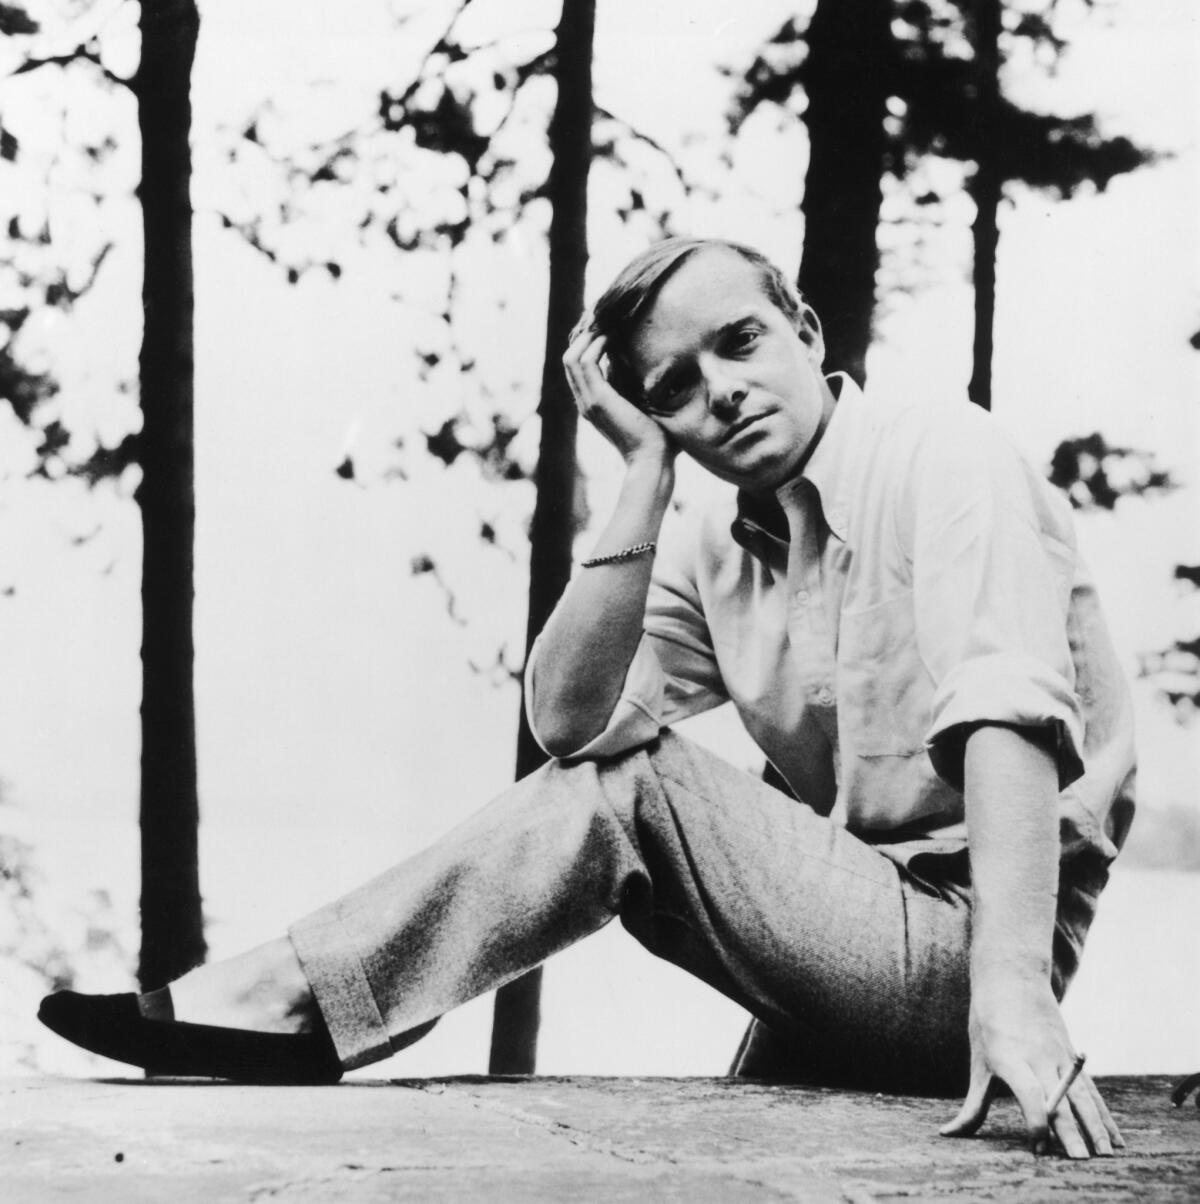 Writer Truman Capote penned the story "A Christmas Memory," recounting a tale of Christmas from when he was 7 years old.